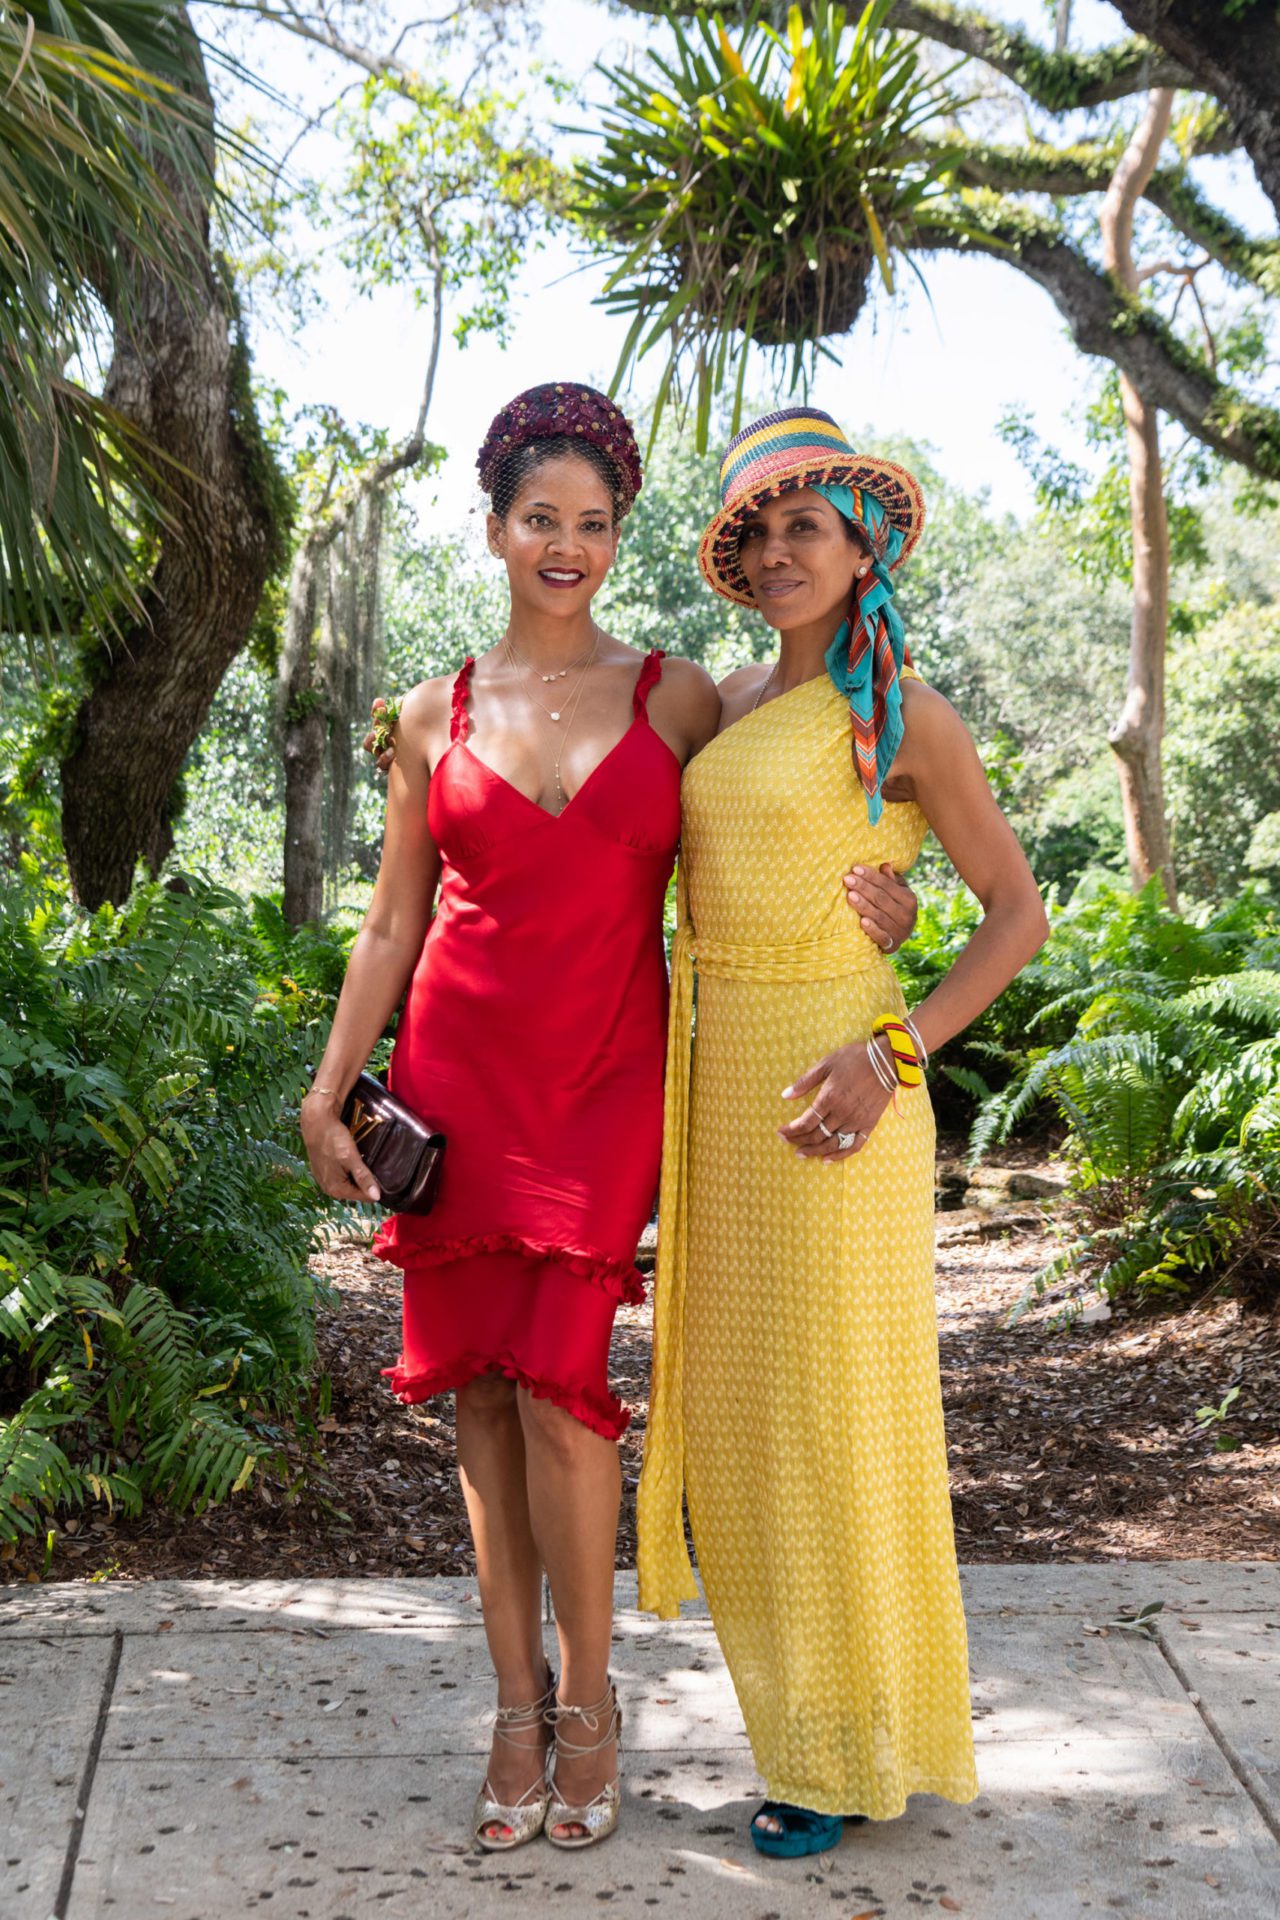 Guests dessed in colorful dresses for the Vizcaya Preservation Luncheon.